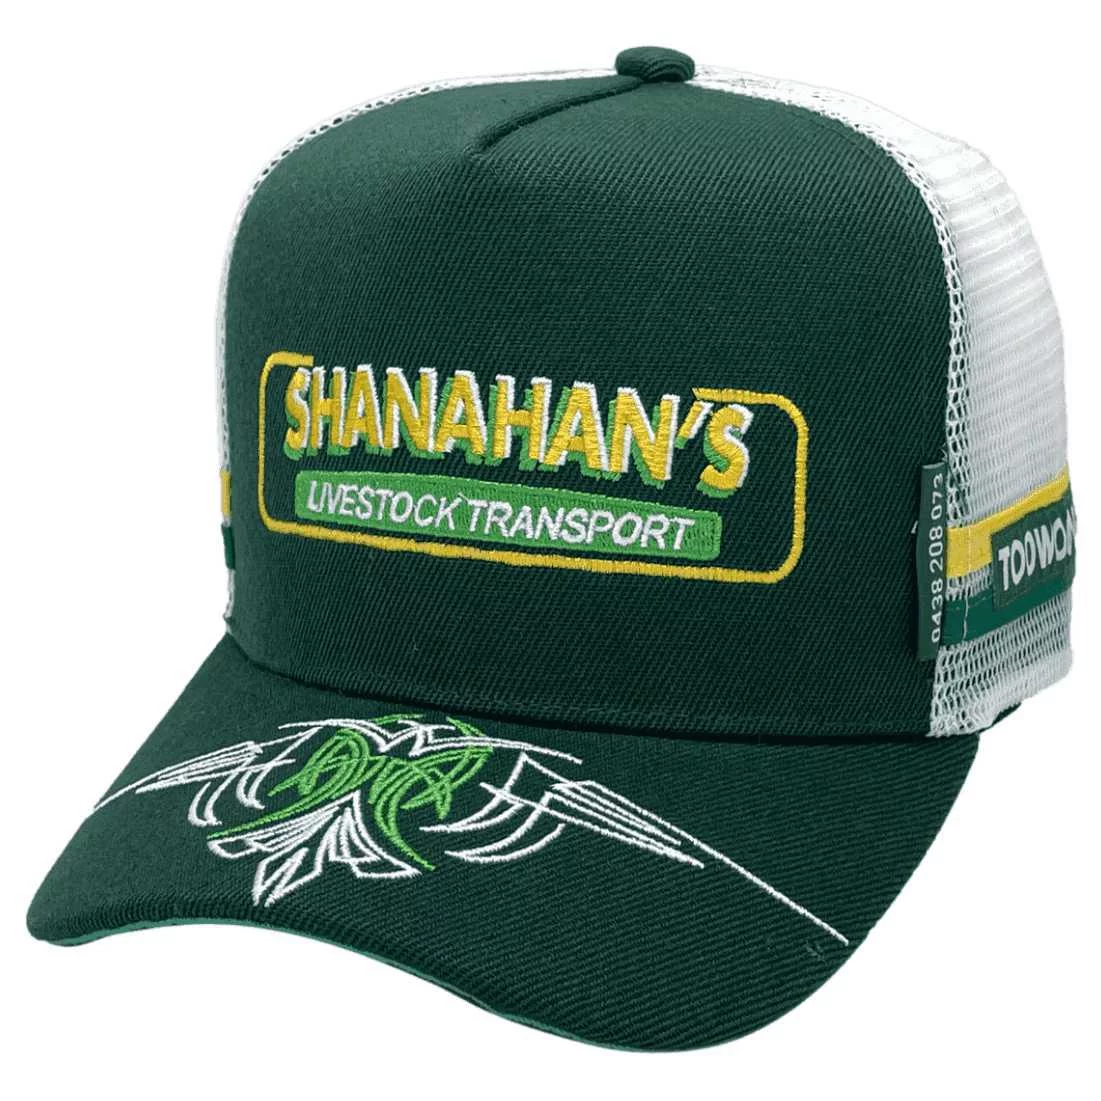 Shanahans Livestock Transport  Wodonga Vic and Toowoomba QLD HP Original Power Trucker Hat with double side bands